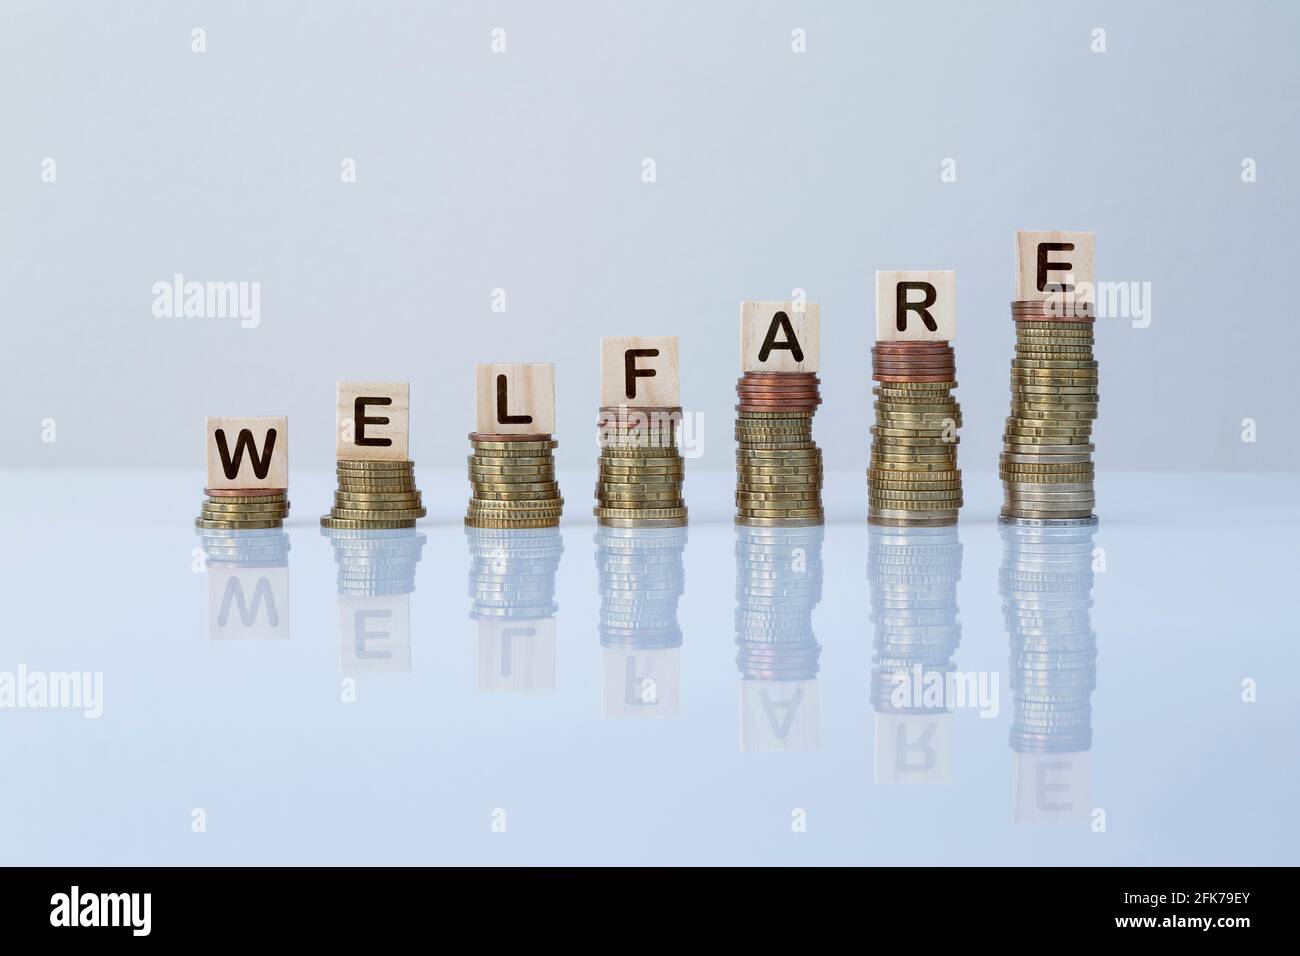 Word 'WELFARE' on wooden blocks on top of ascending stacks of coins on gray background. Concept photo of welfare, government support & social security Stock Photo